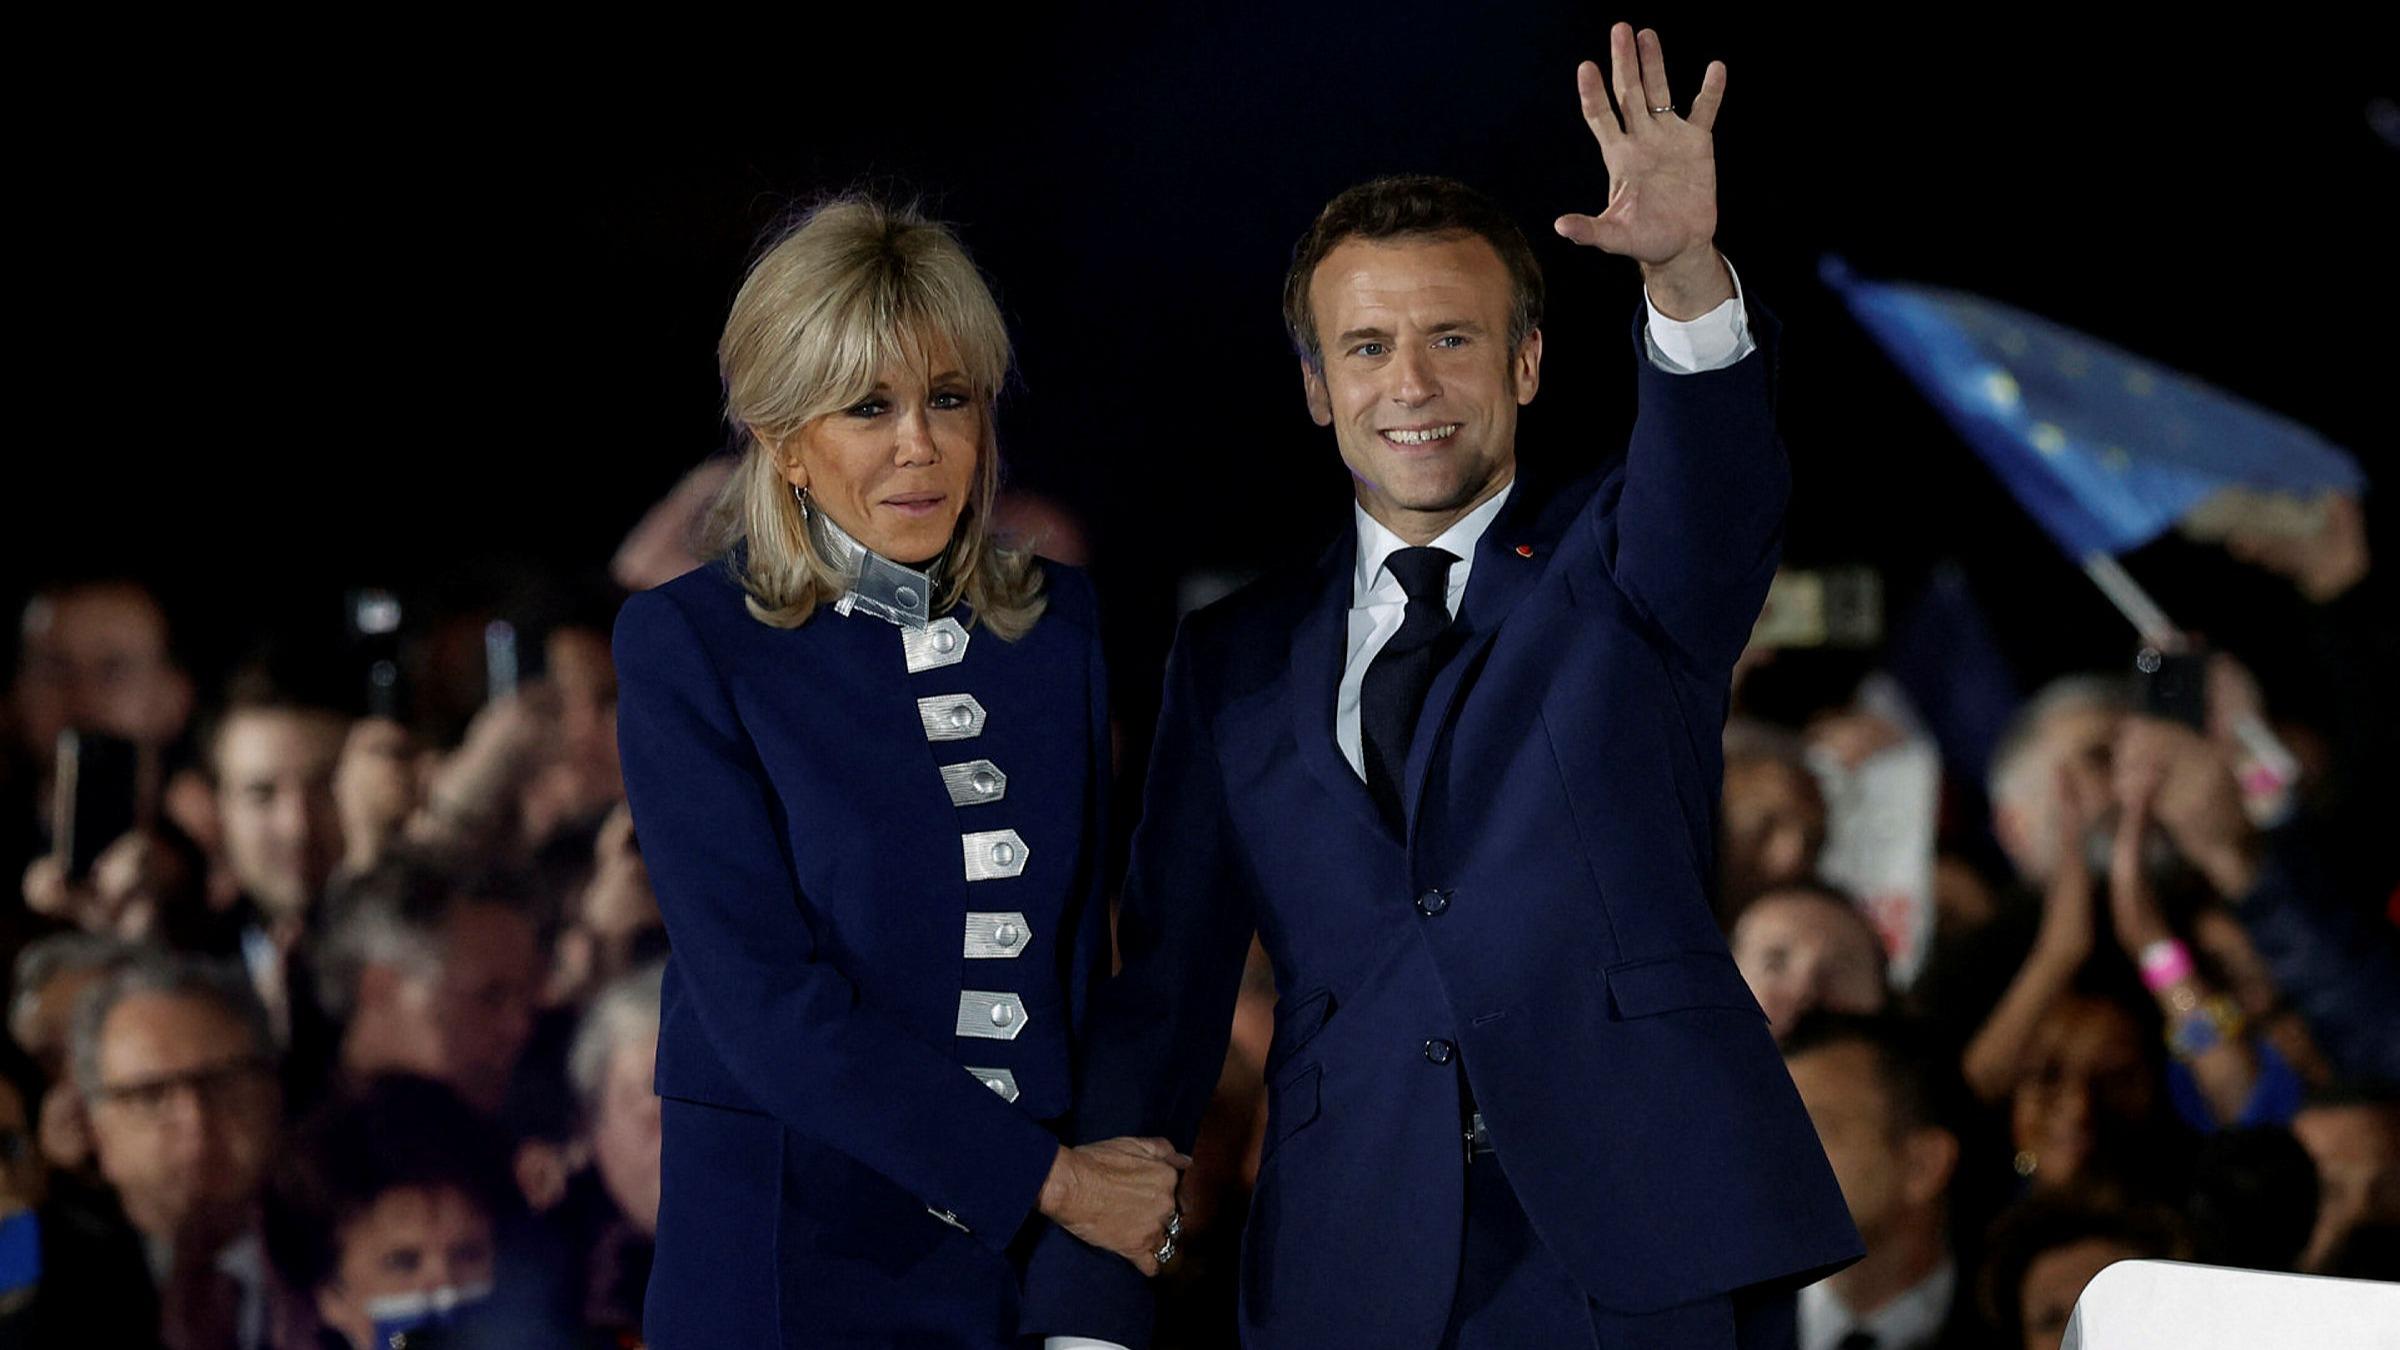 Emmanuel Macron is elected as French President for another term_40.1